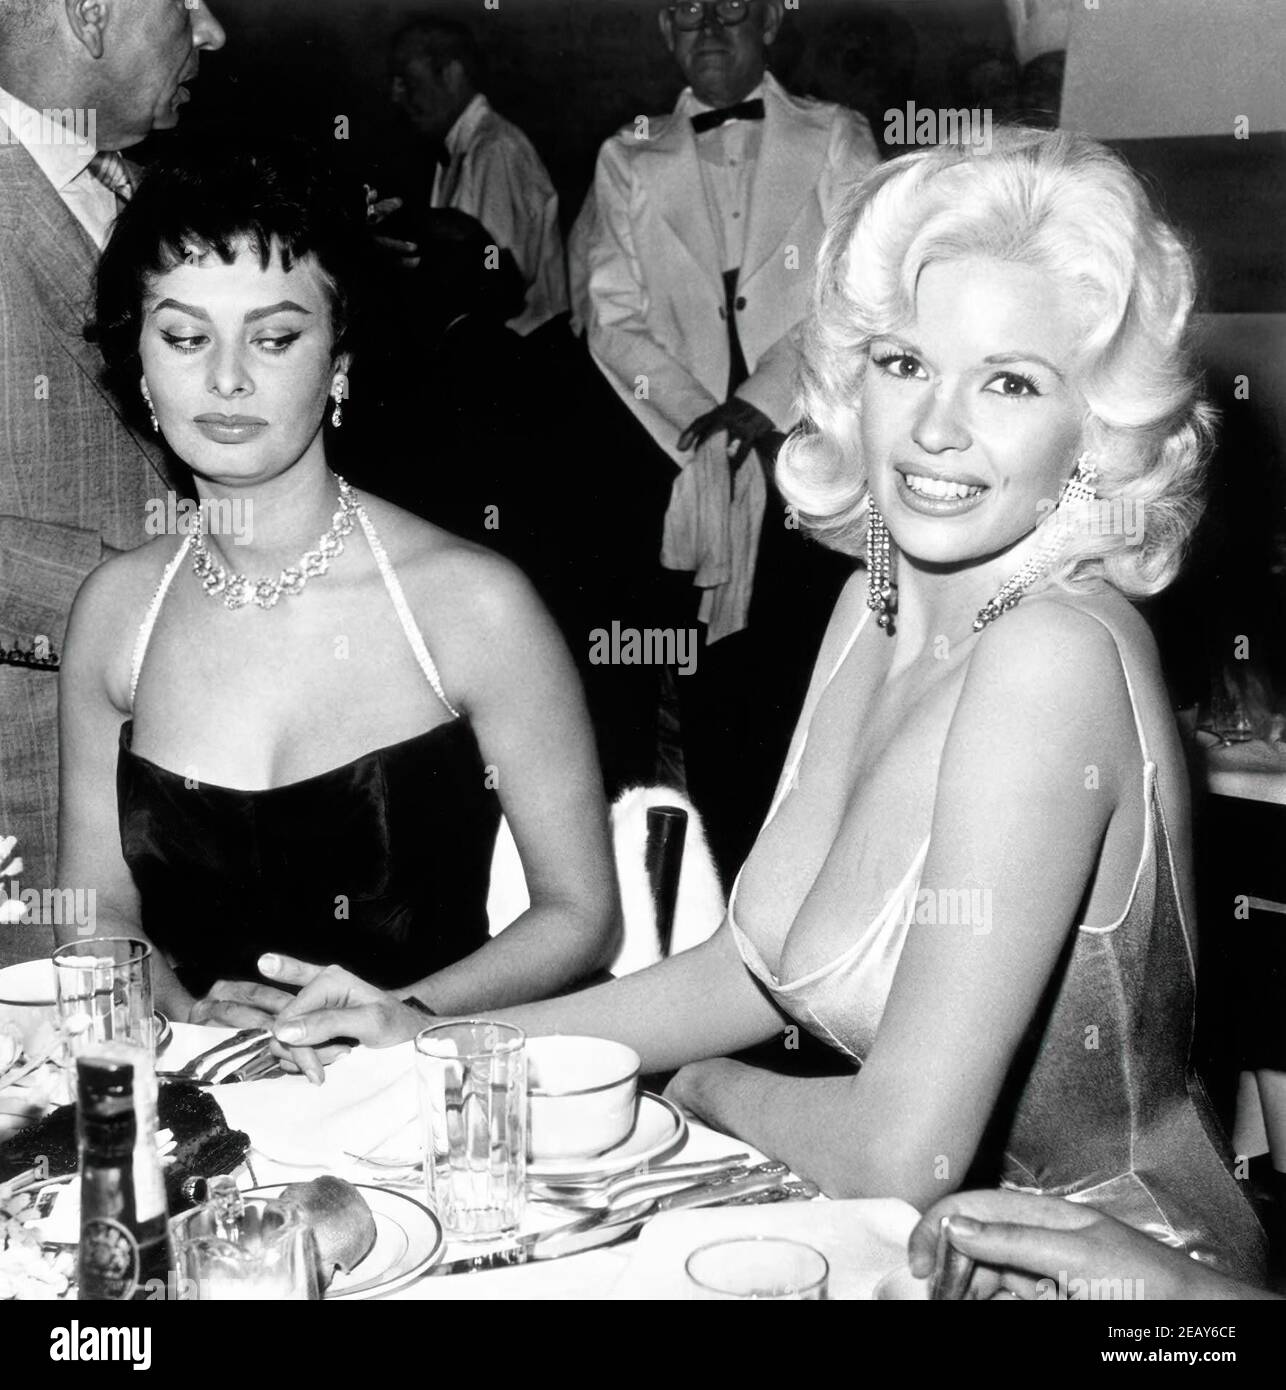 American actress and model Jayne Mansfield, known for her publicity stunts, attended a dinner at the exclusive Beverly Hills Romanoff's restaurant hosted by Paramount Pictures to officially welcome Italian actress Sophia Loren to Hollywood. A photograph of the two women, with Loren casting a sideways glance at Mansfield's cleavage, was distributed world-wide and became an international sensation. Stock Photo